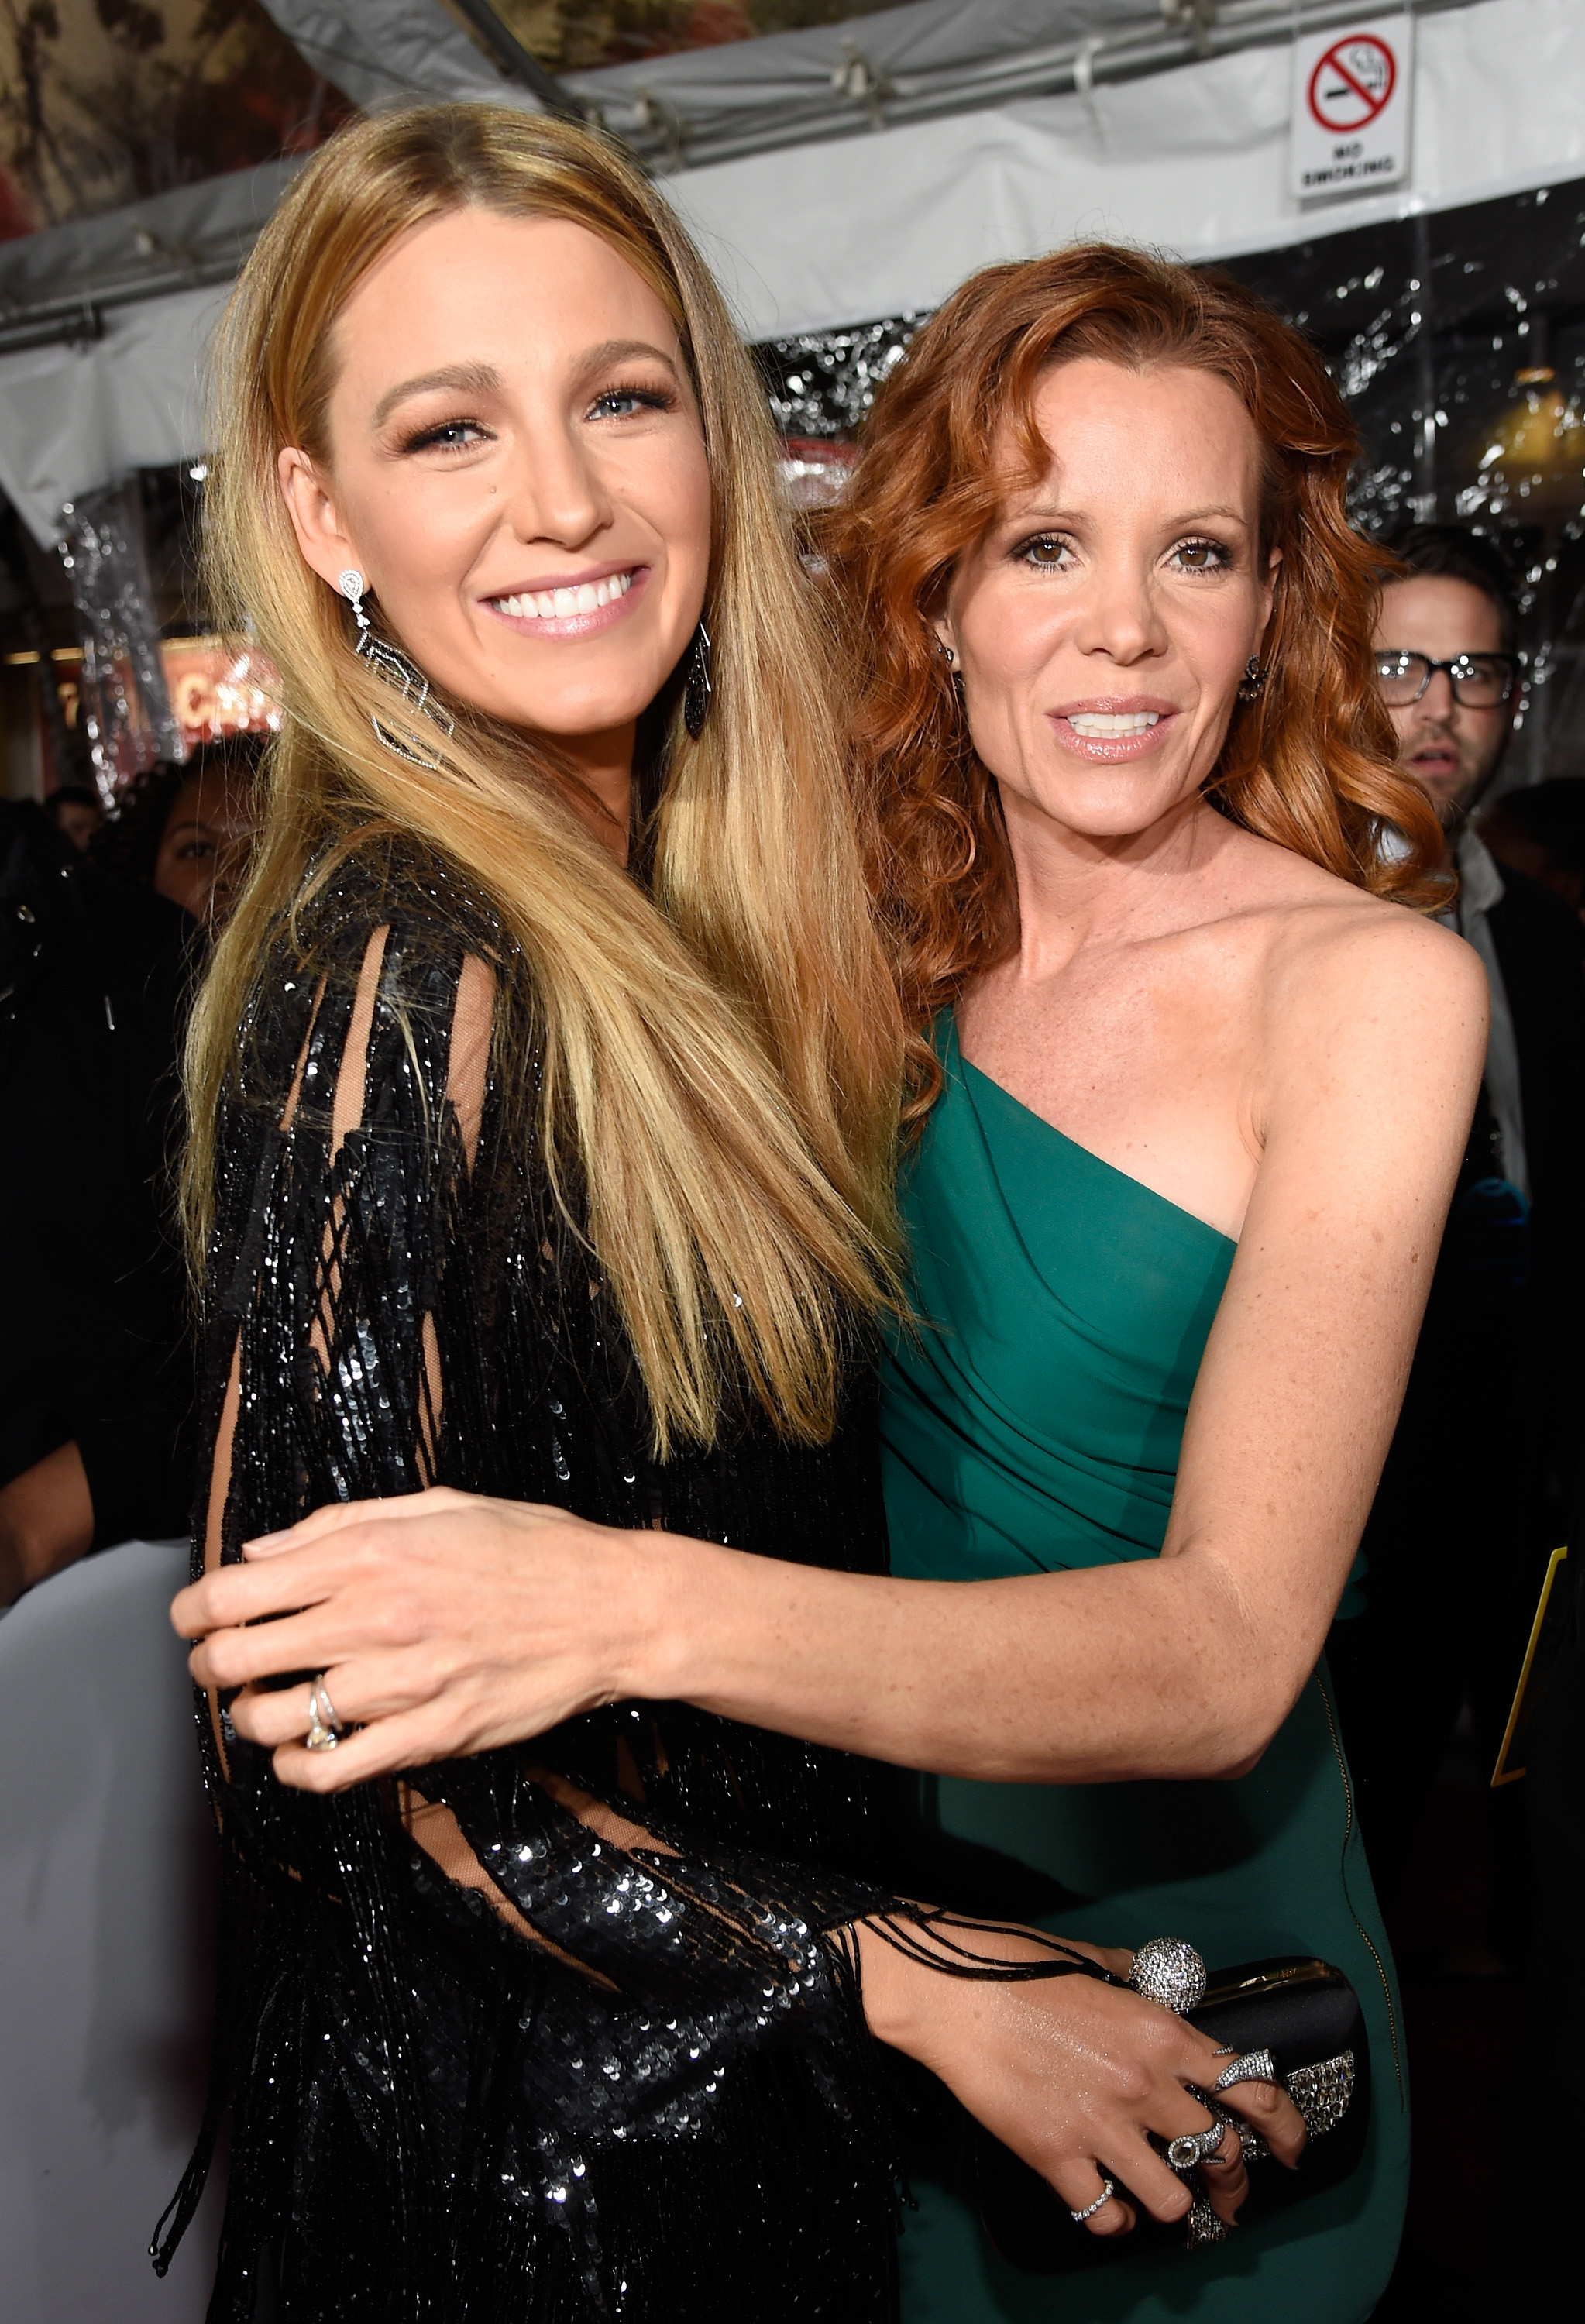 In 2017, Blake Lively and Robyn Lively attended the People’s Choice Awards together